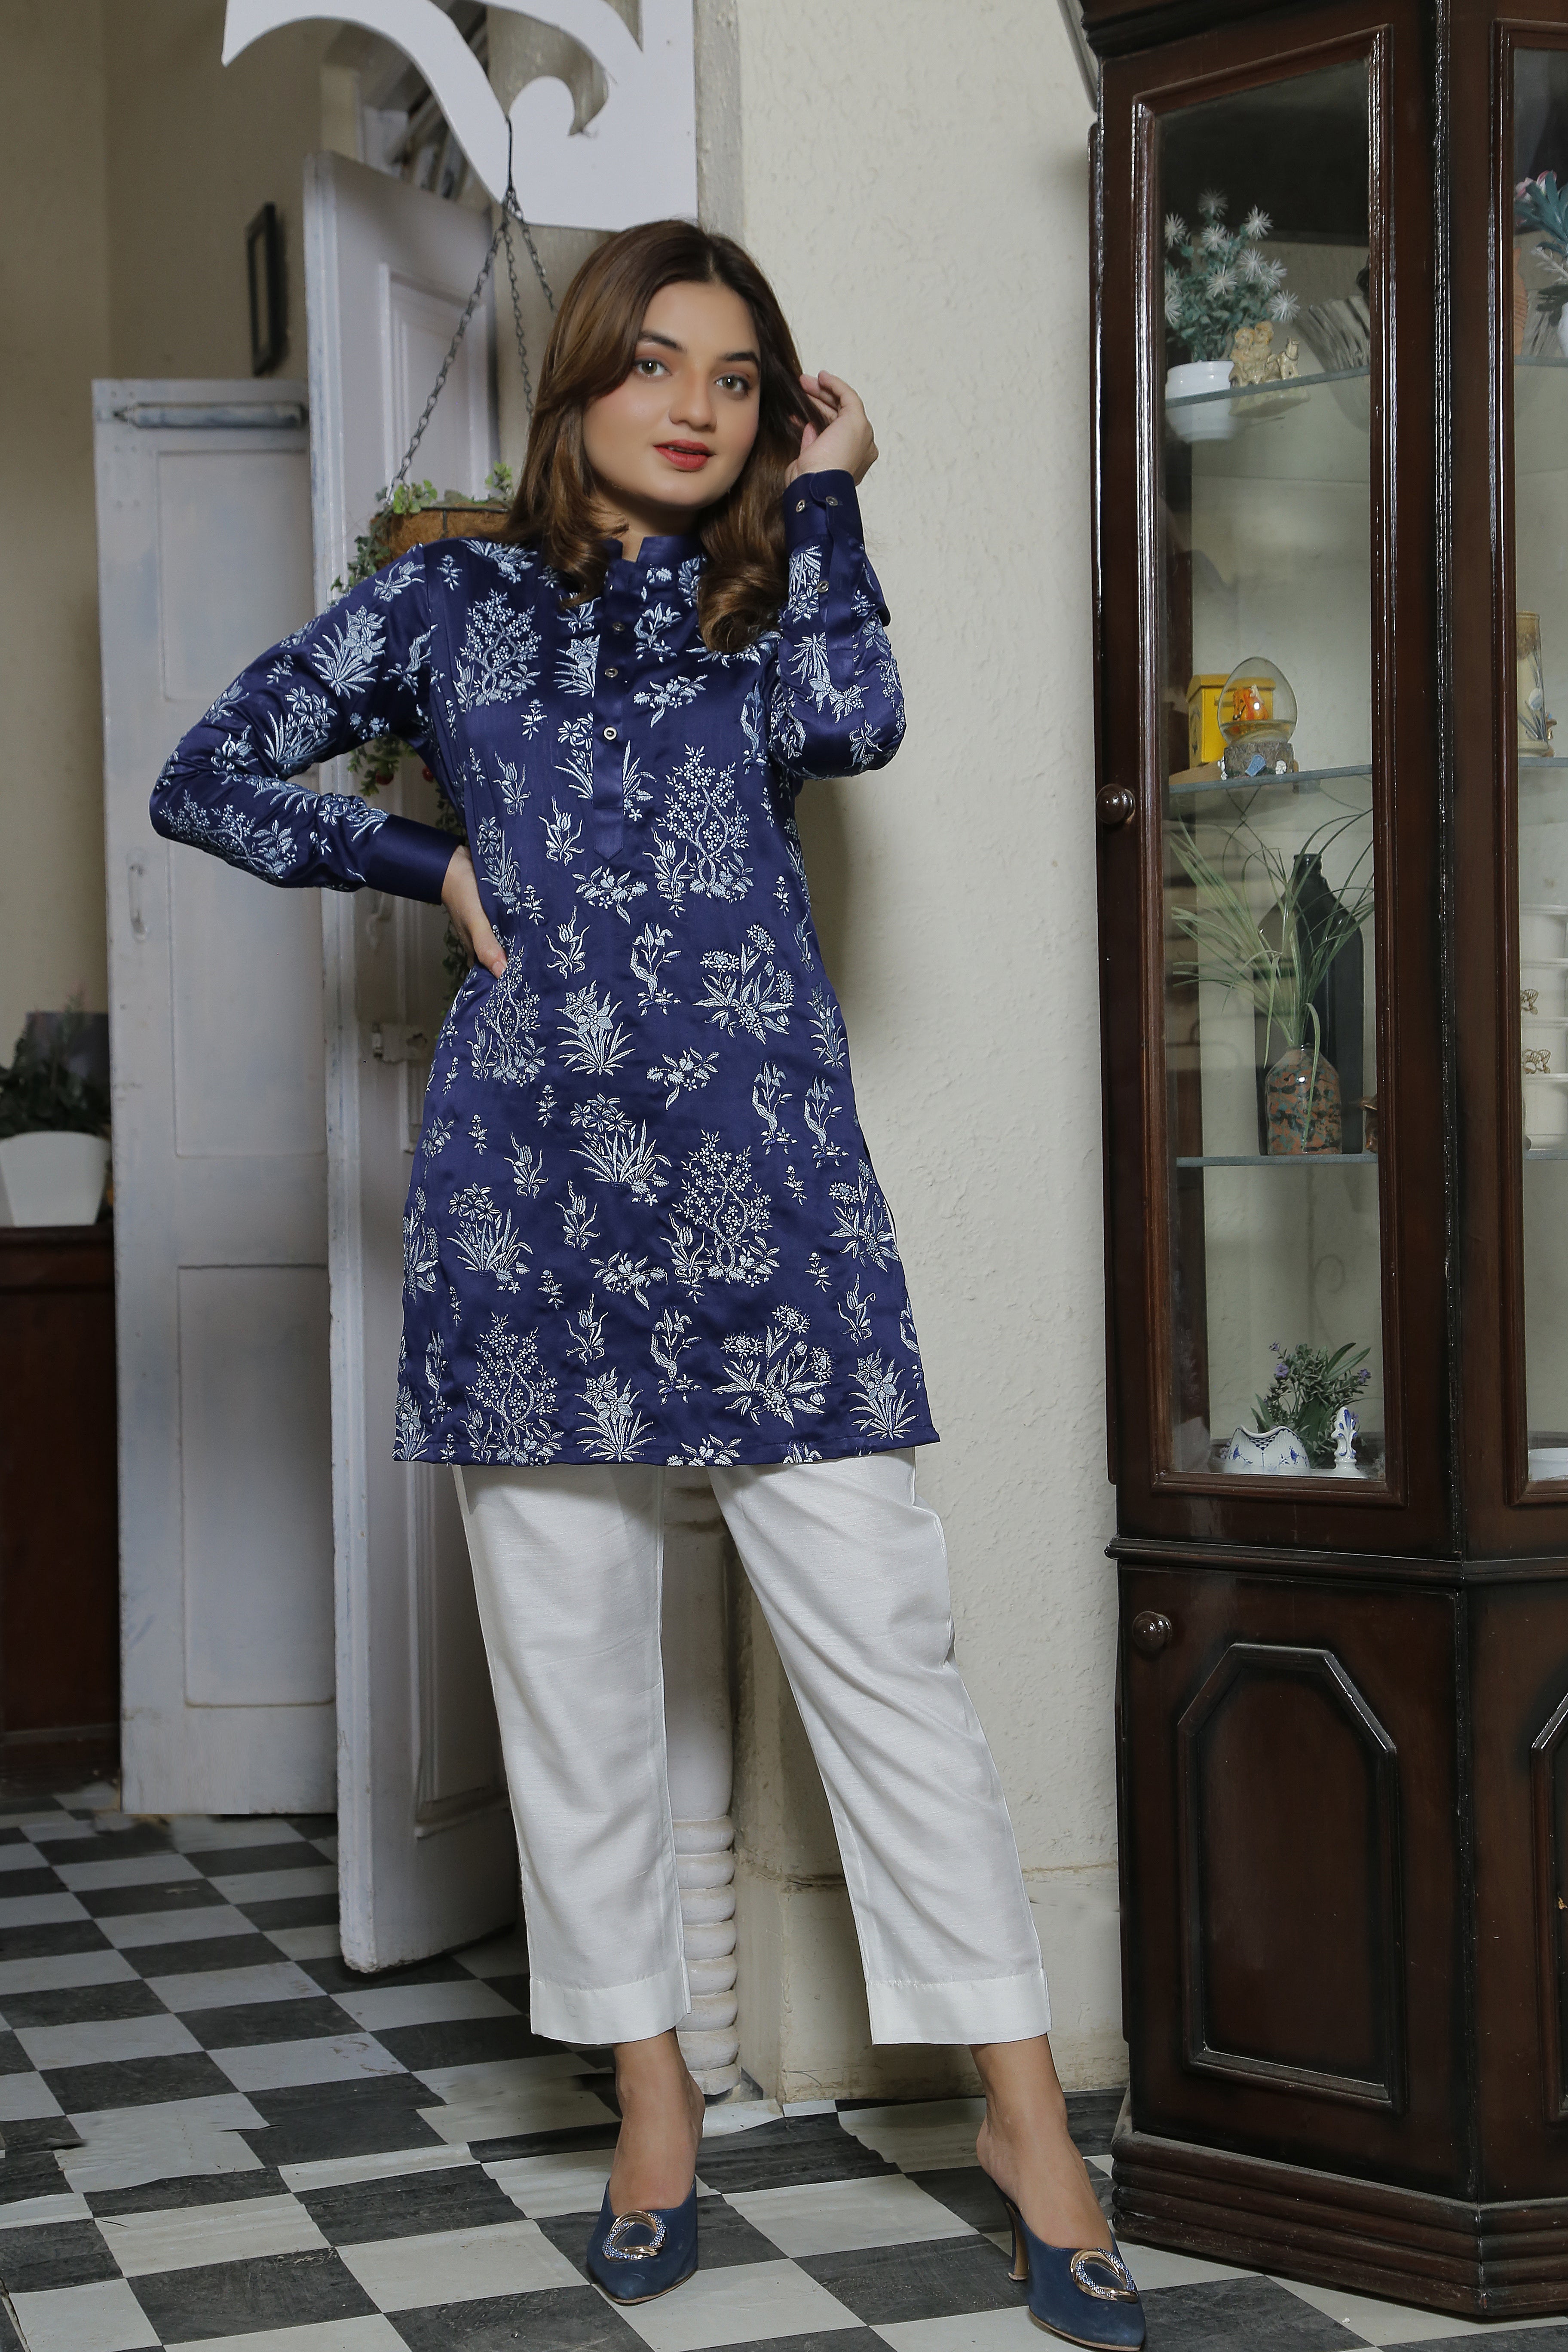 ER EMB WM 23Bluish Color with Floral Embroided Kurta With White Trouser